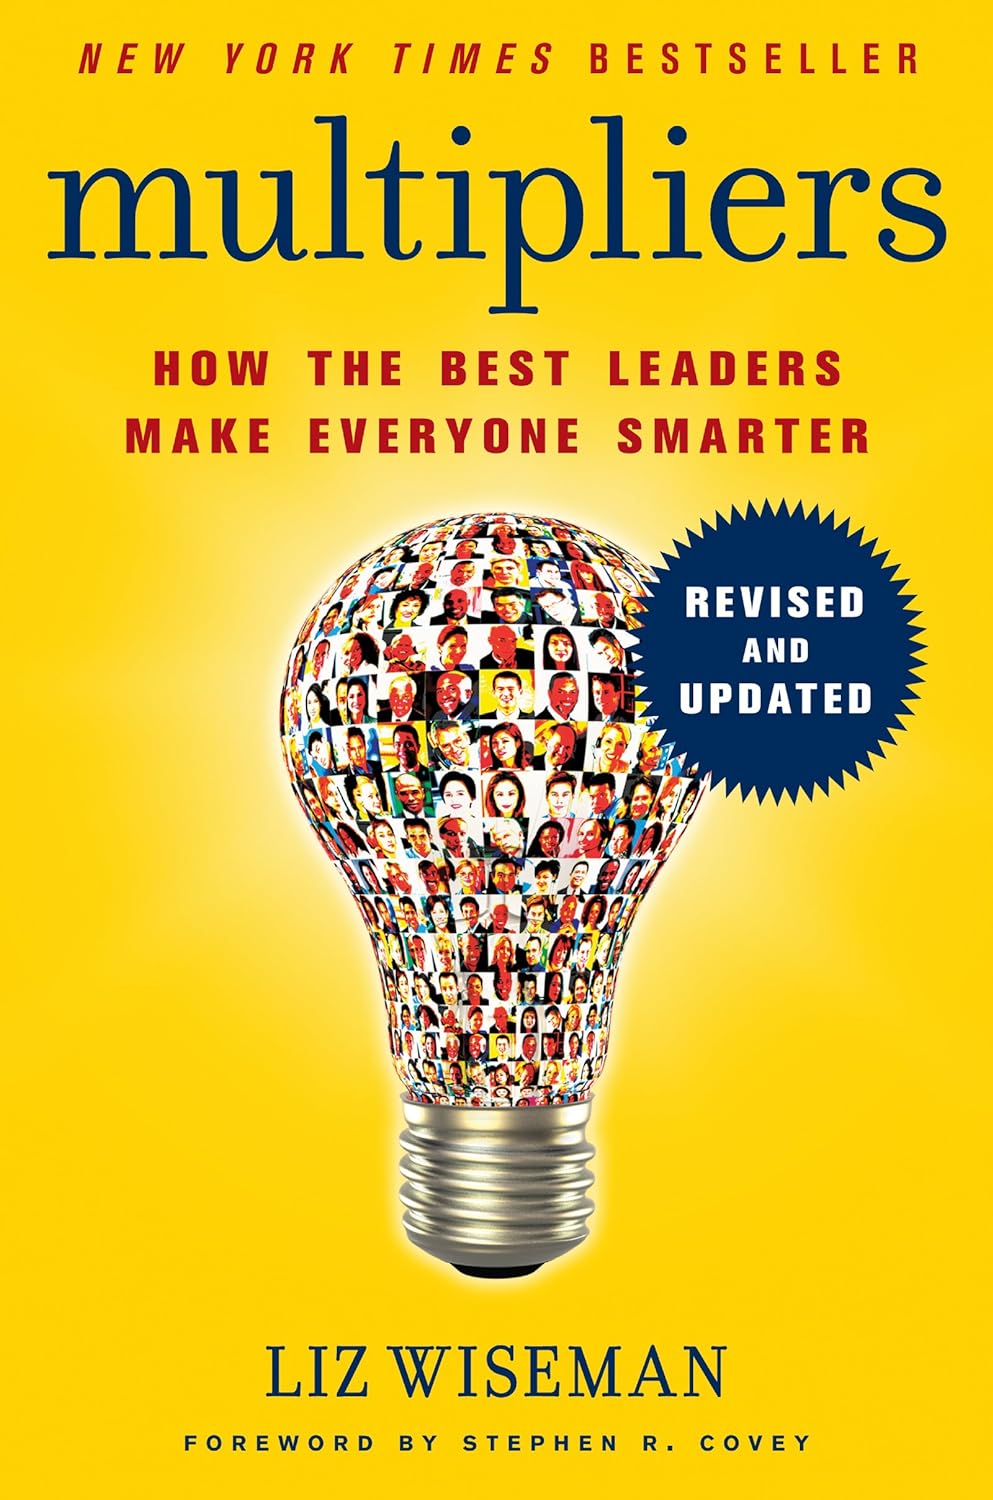 Liz Wiseman - Multipliers, Revised and Updated - How the Best Leaders Make Everyone Smarter